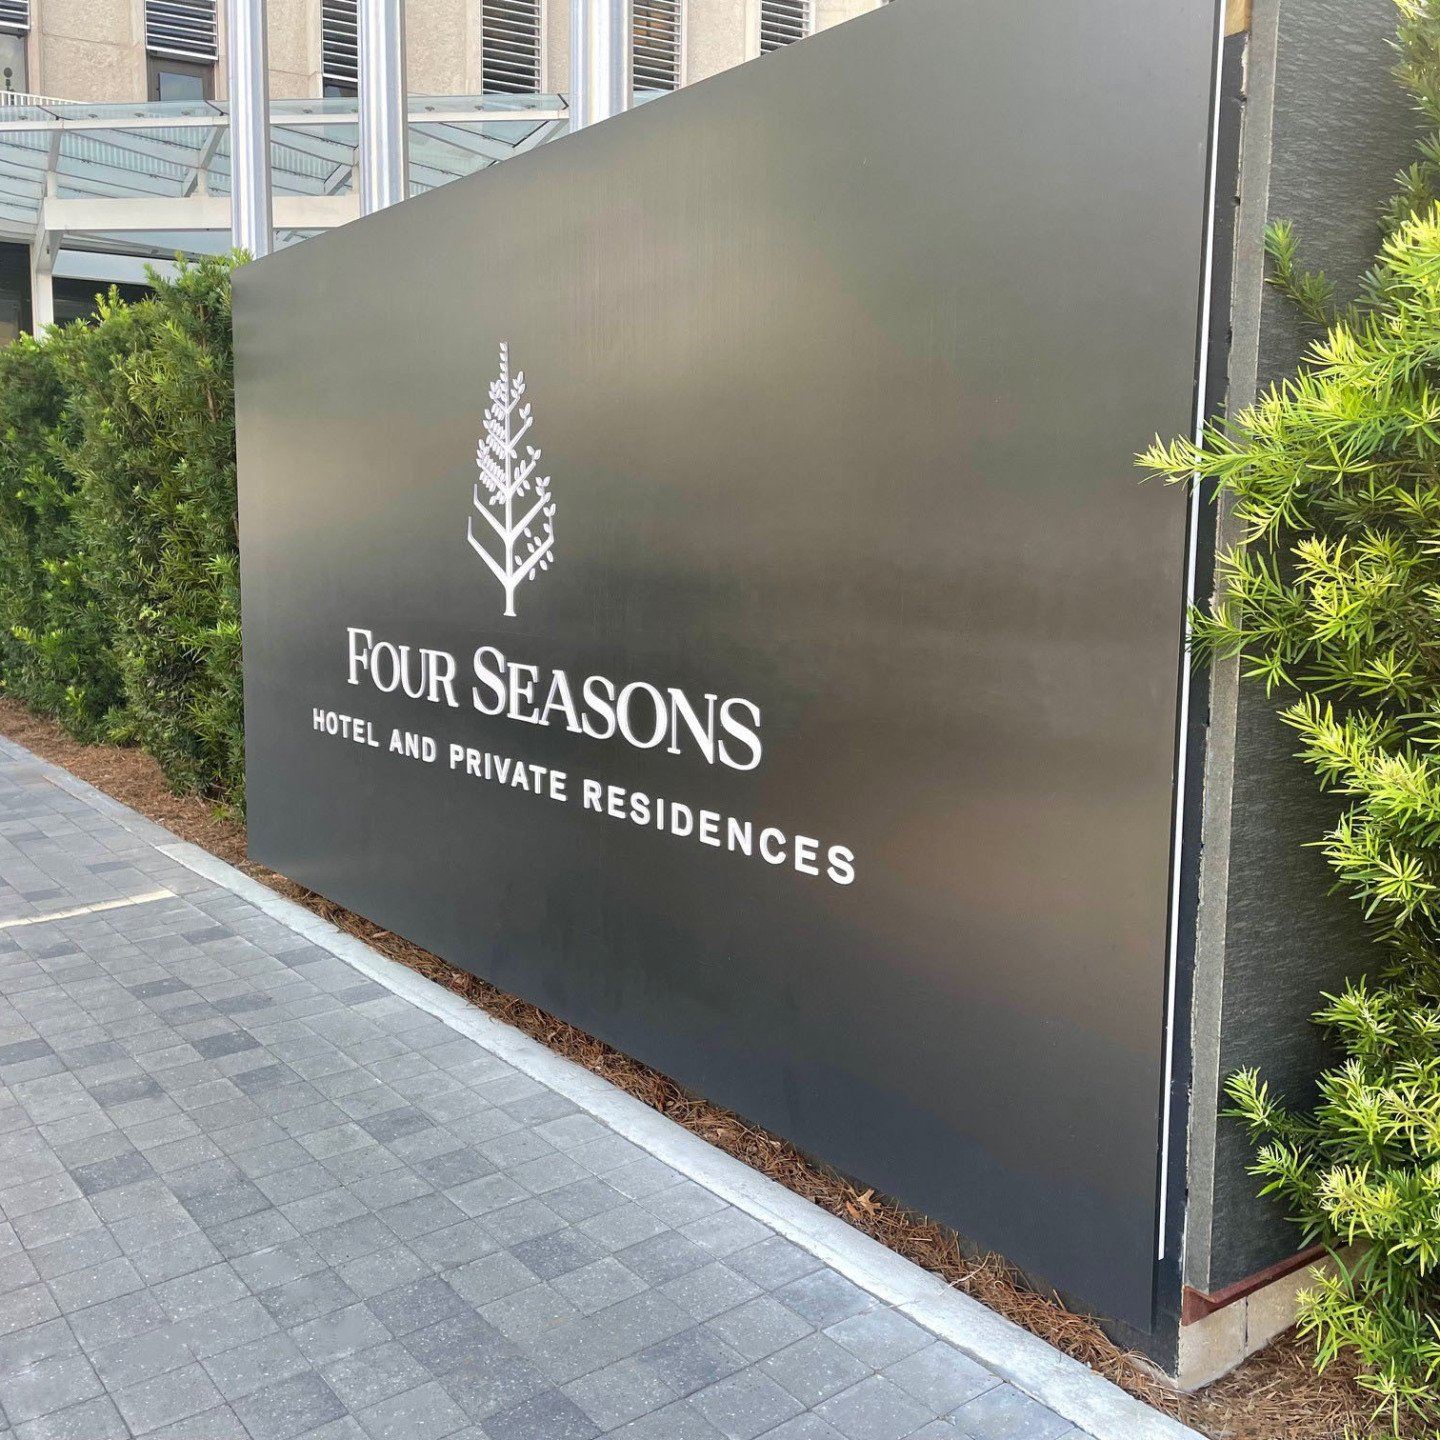 Main signage for the Four Seasons in New Orleans.